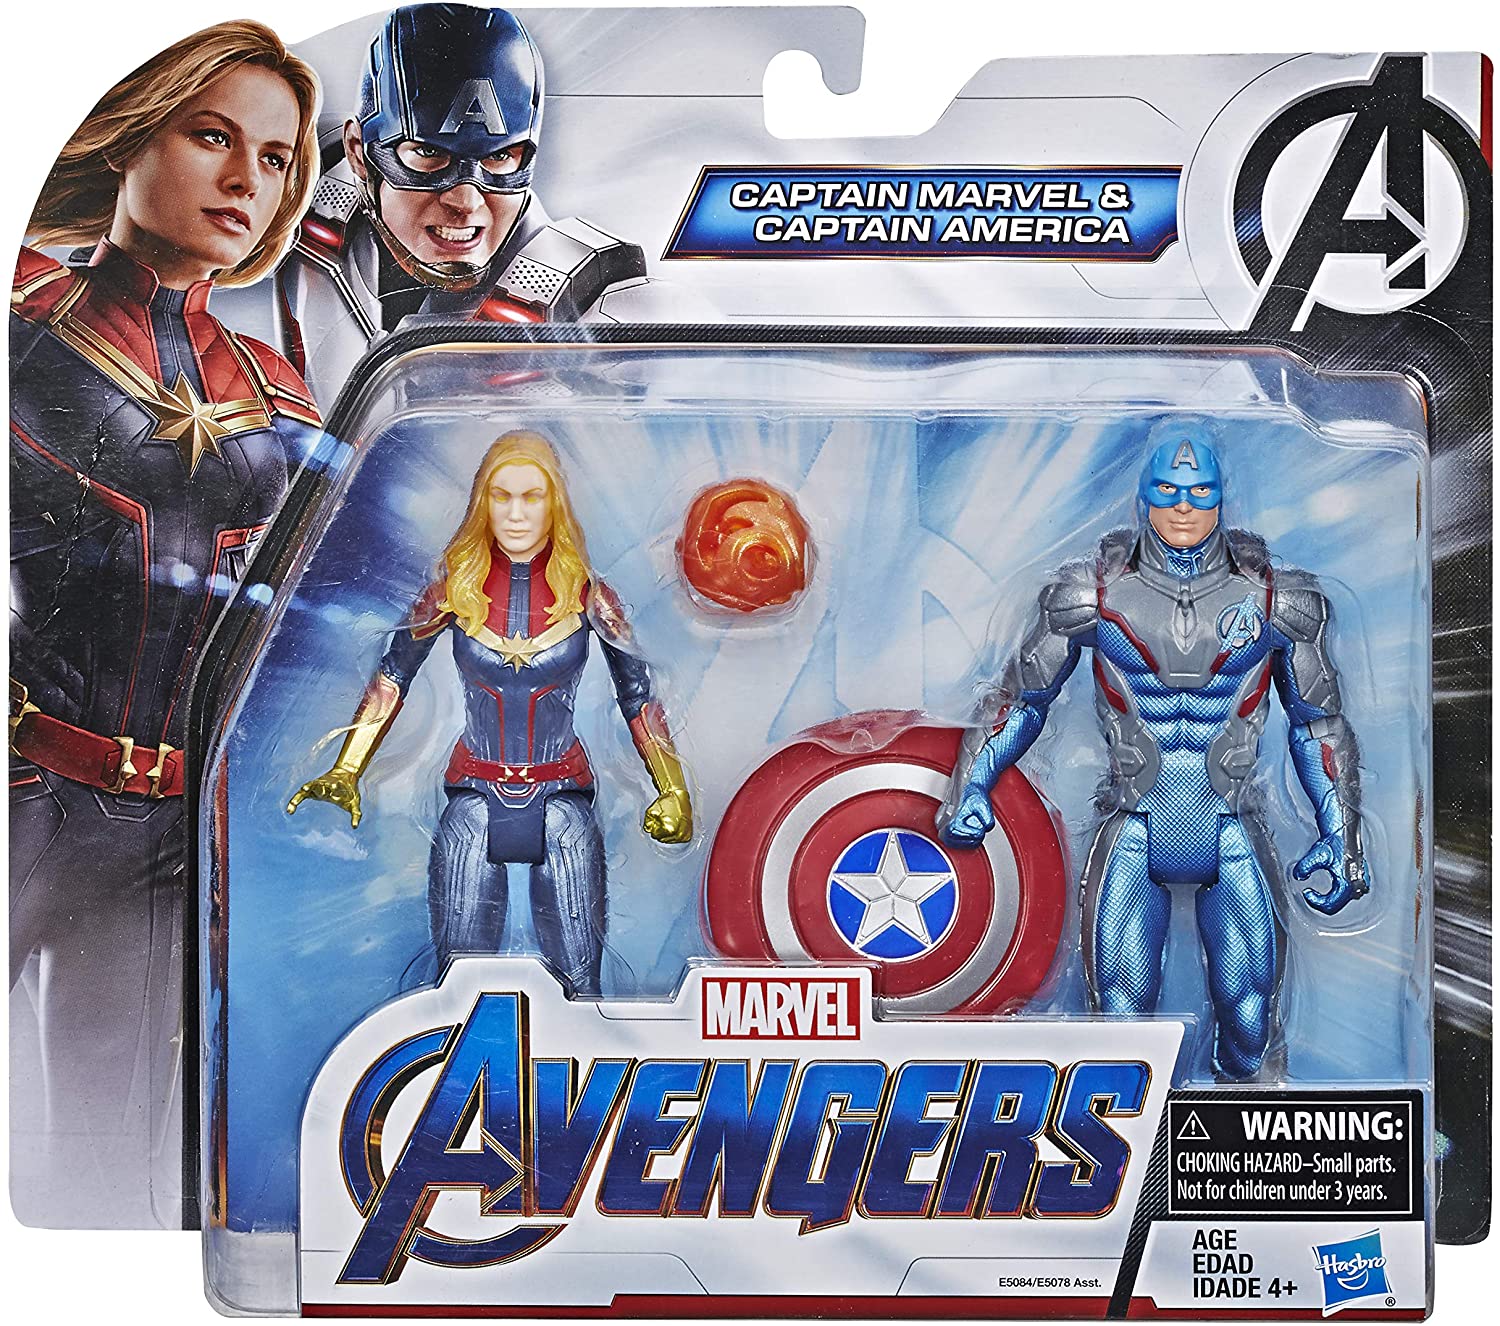 Toys for saving the universe- these 6-inch Avengers figures feature design inspired by Avengers: Endgame, so kids can imagine their favorite Super heroes battling against the evil Thanos Heroic Avengers ready for the fight - Captain America powers up in